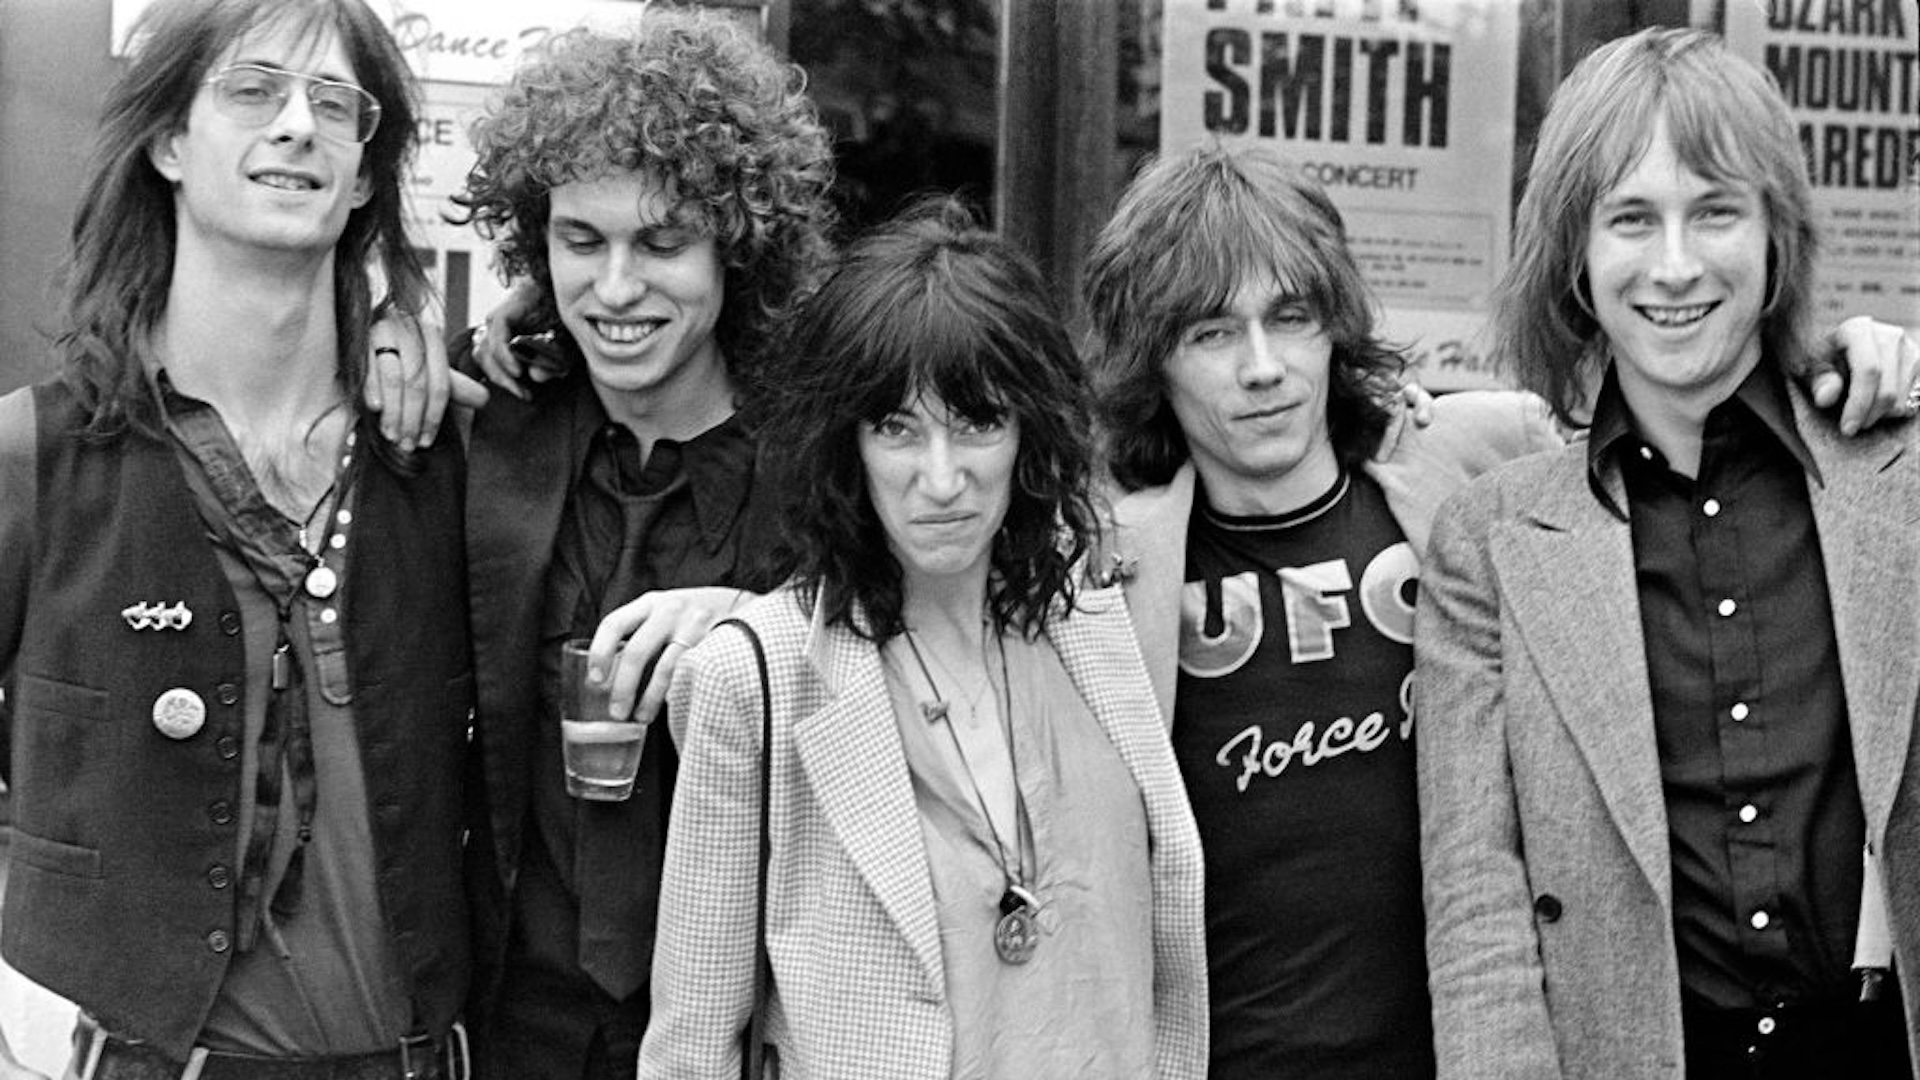 The Patti Smith Group pose for portraits, (L-R) Lenny Kaye, Richard Sohl, Patti Smith, Ivan Kral and Jay Dee Daugherty, in May 1976 in Copenhagen, Denmark.